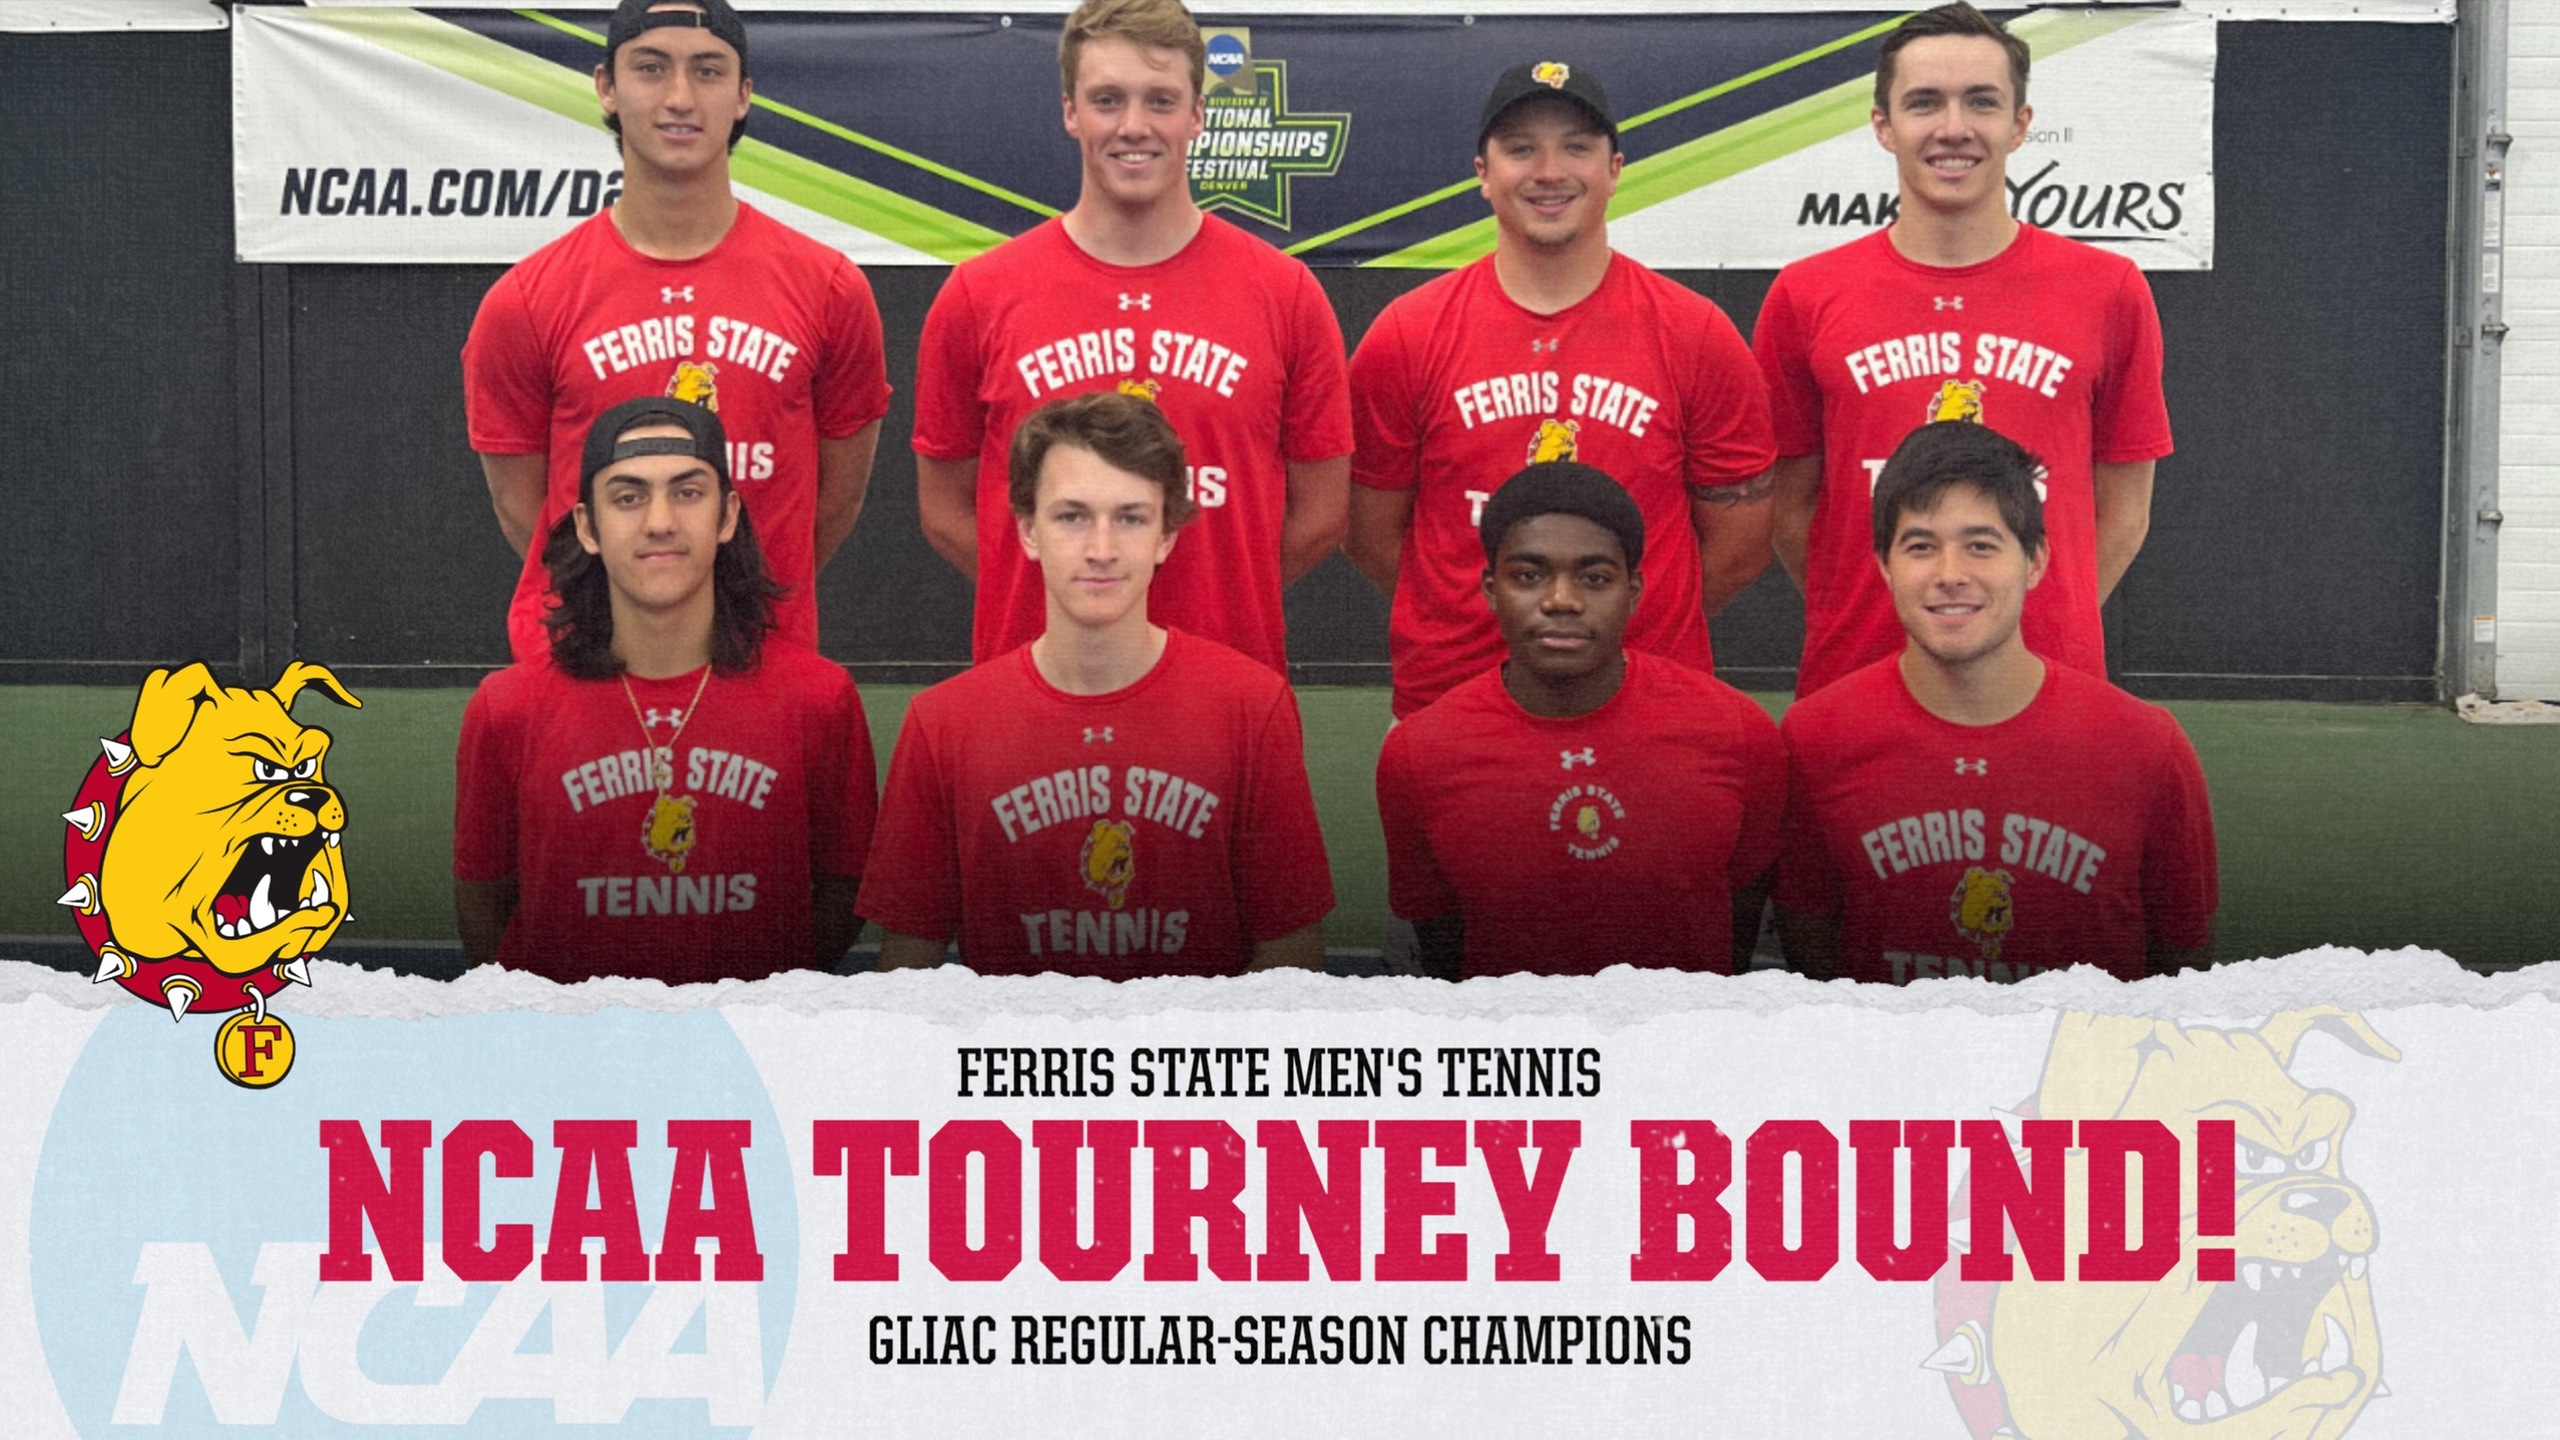 Ferris State Men's Tennis Receives Its 26th All-Time NCAA Division II Tournament Berth!